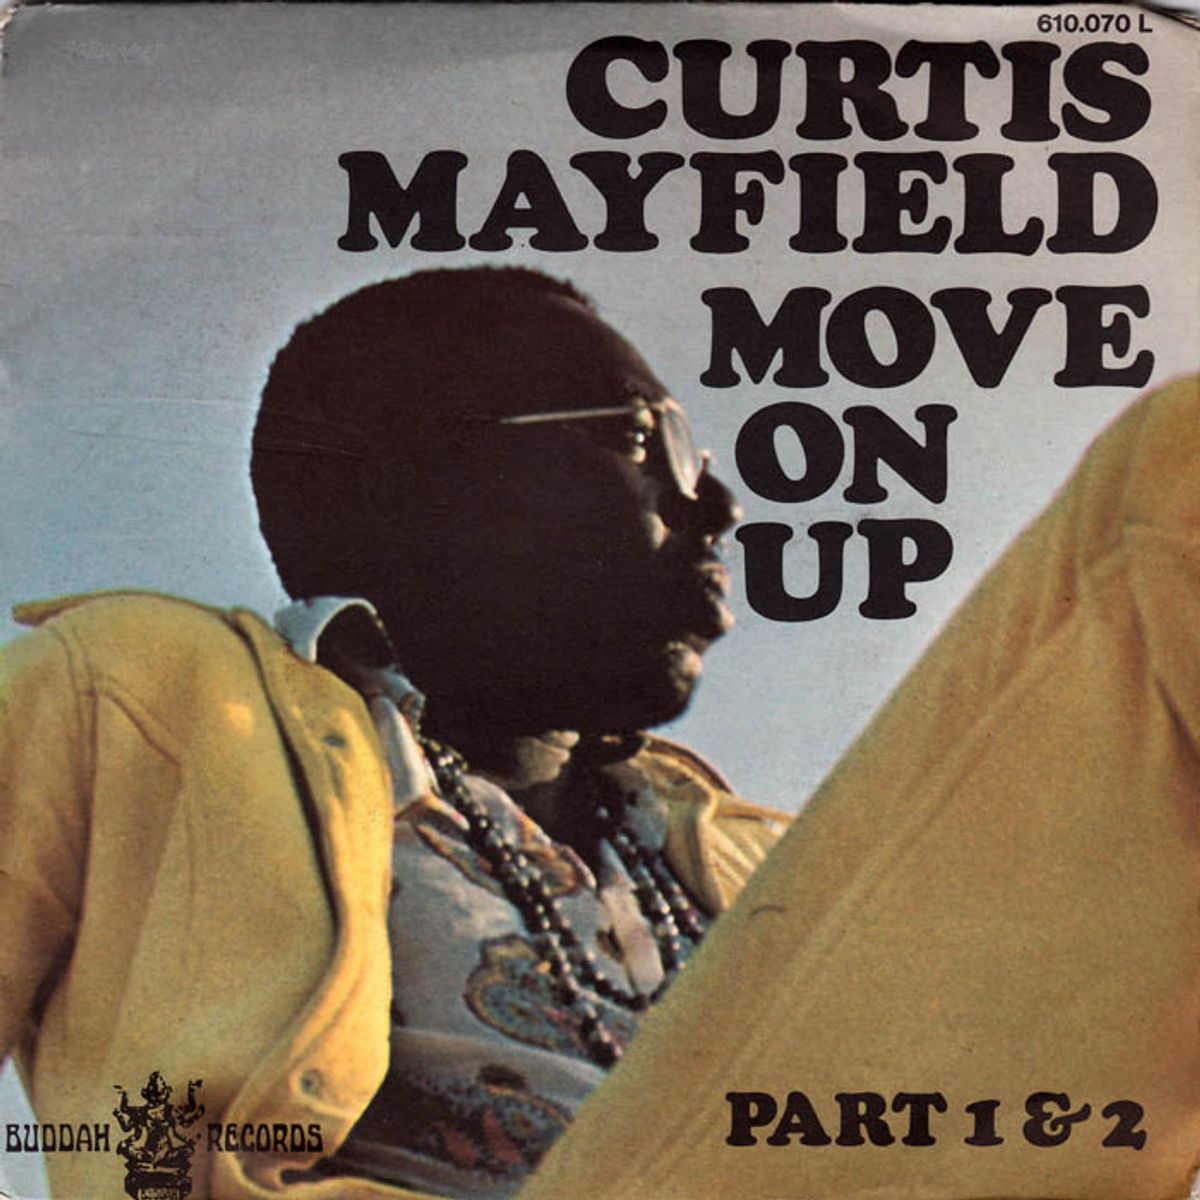 #JukeboxPaultje - Curtis Mayfield - Move On Up (1970)